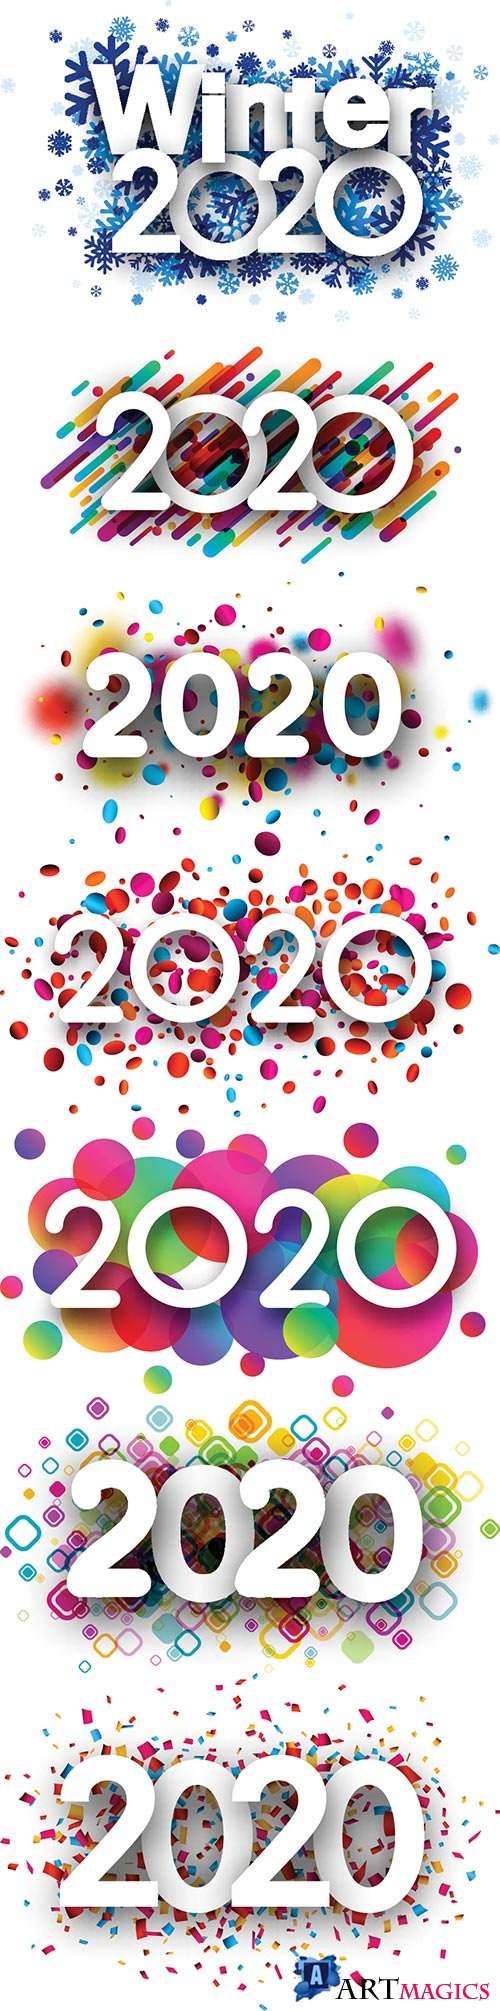 2020 new year sign with colorful round confetti on white 